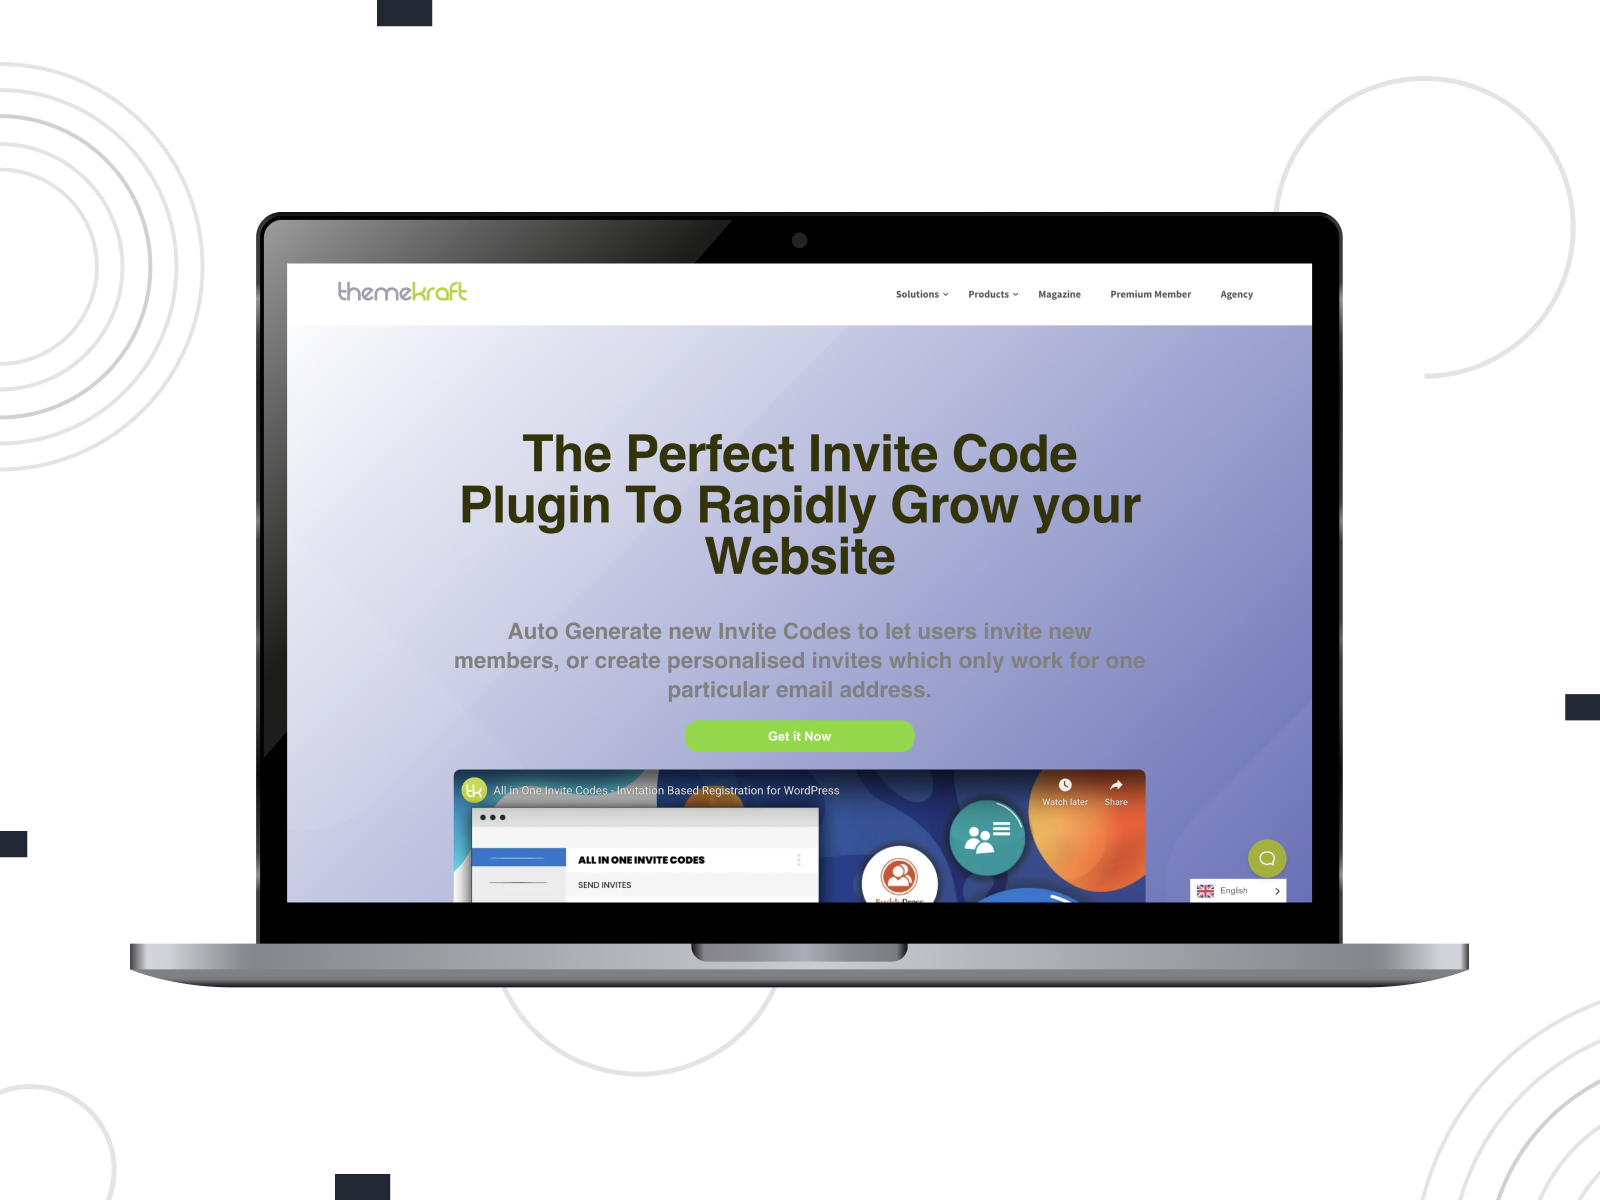 View of All in One Invite Codes, a feature-rich invite code WordPress plugin with a variety of premium add-ons.